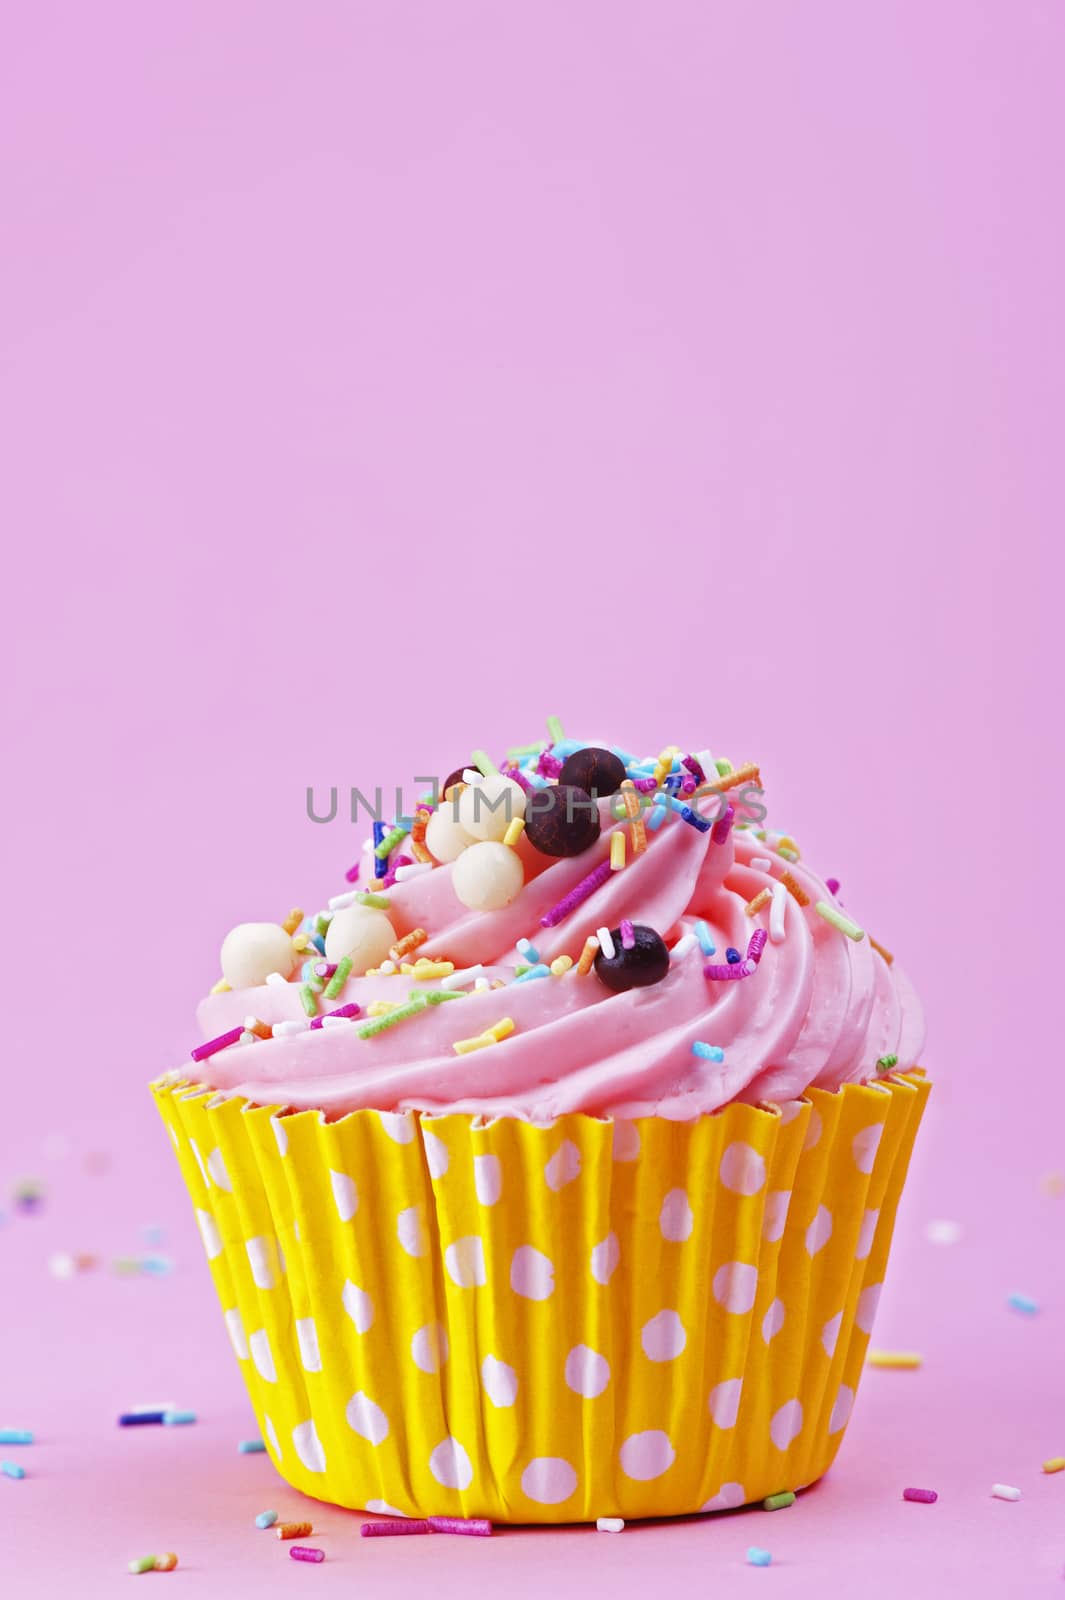 Sweet cupcake with sprinkles and chocolate balls isolated on a p by Michalowski